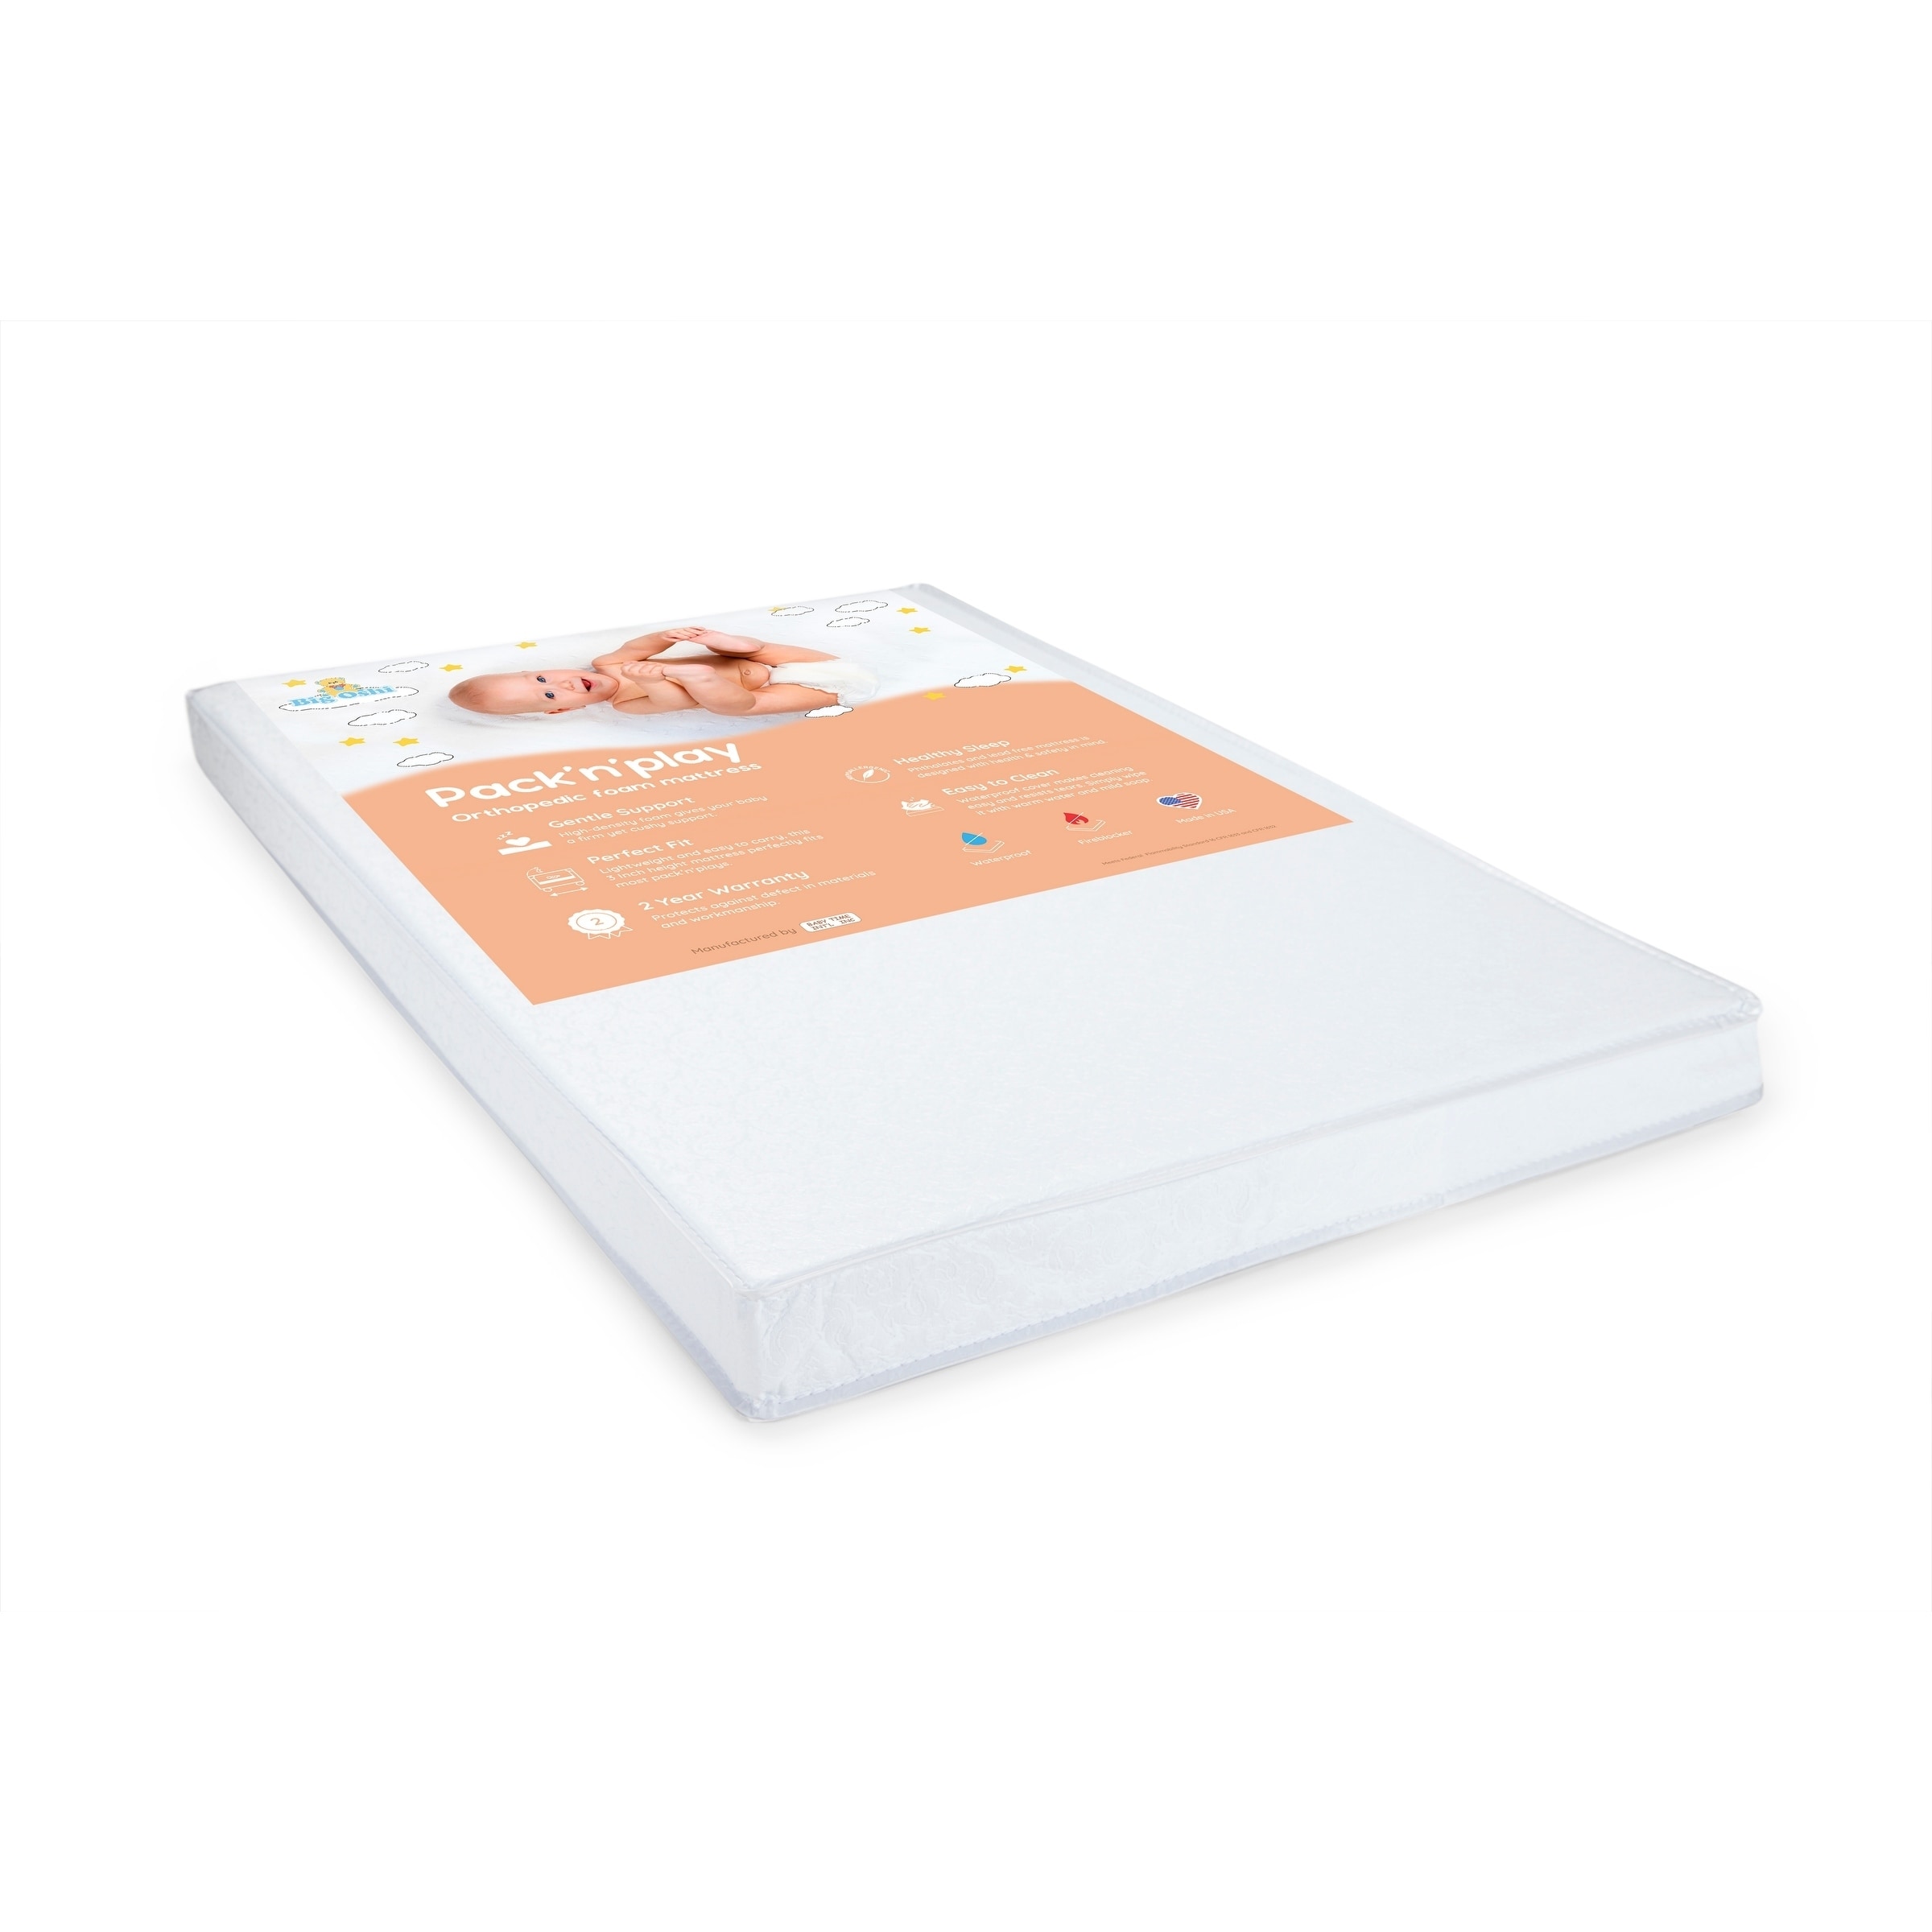 foam mattress for pack and play